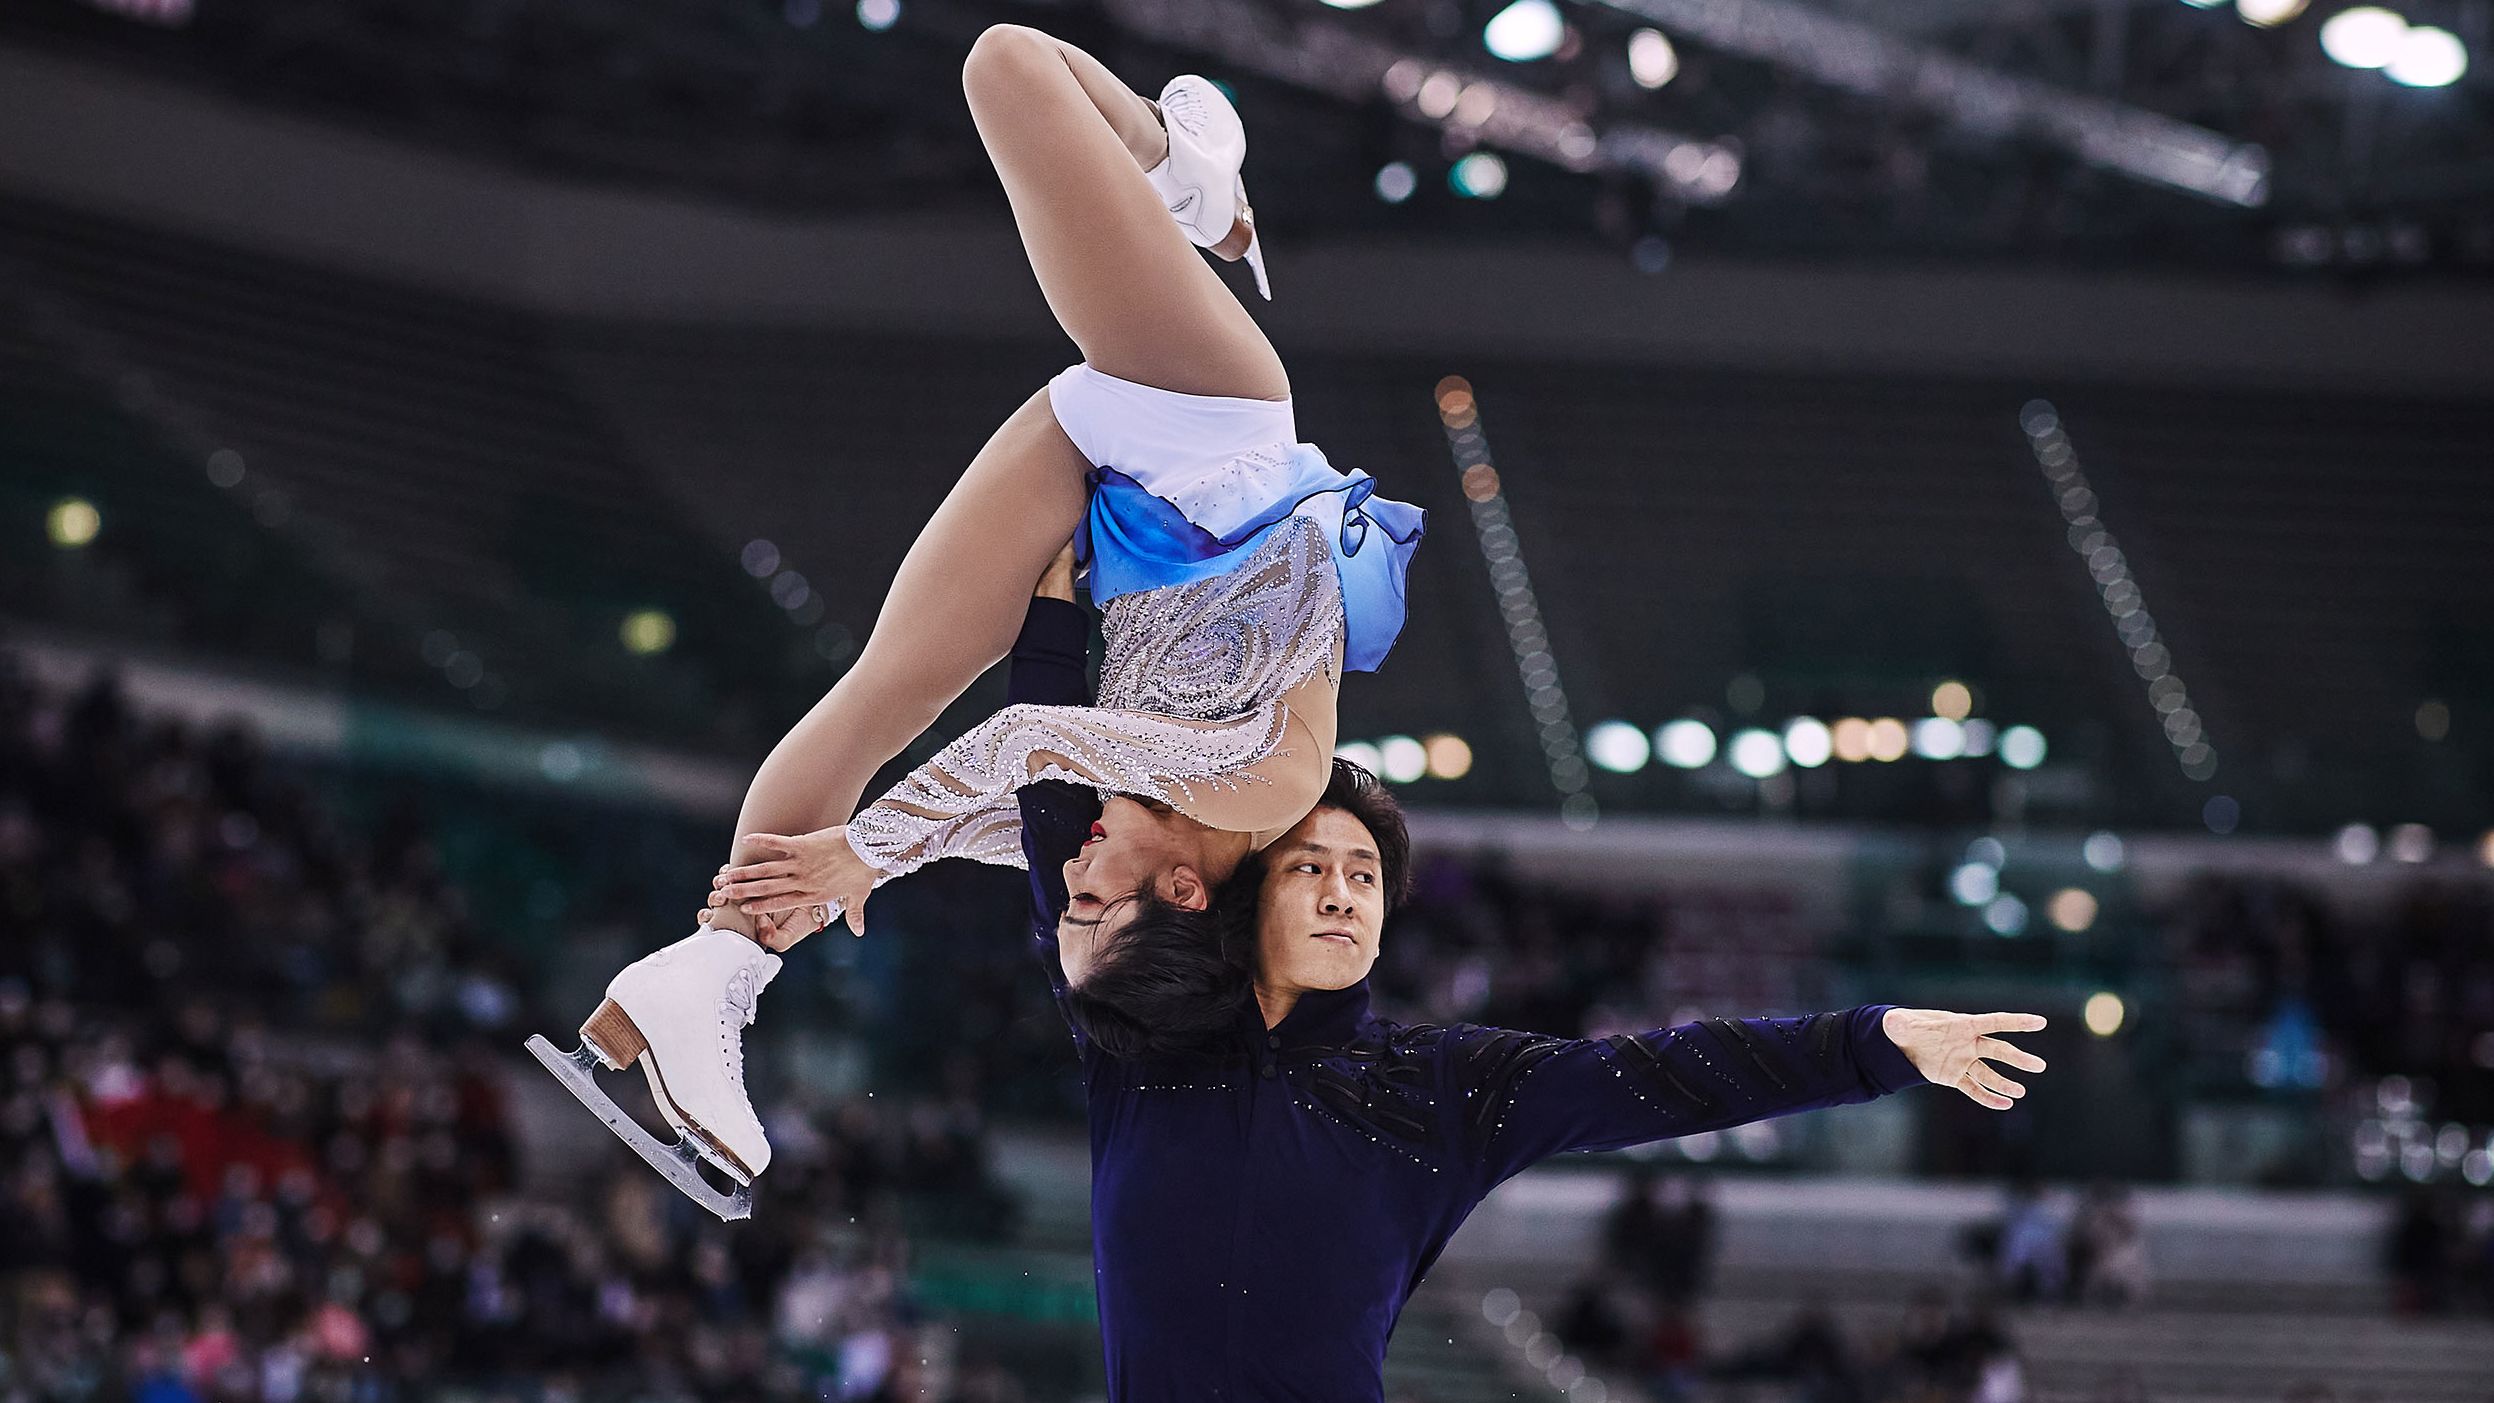 <strong>Sui Wenjing and Han Cong (China):</strong> Sui and Han, one of the best figure skating pairs in the world, will be among the host nation's best hopes for a gold medal. They missed out by just .43 points four years ago, finishing with the silver. They bounced back with gold at the World Championships in 2019.